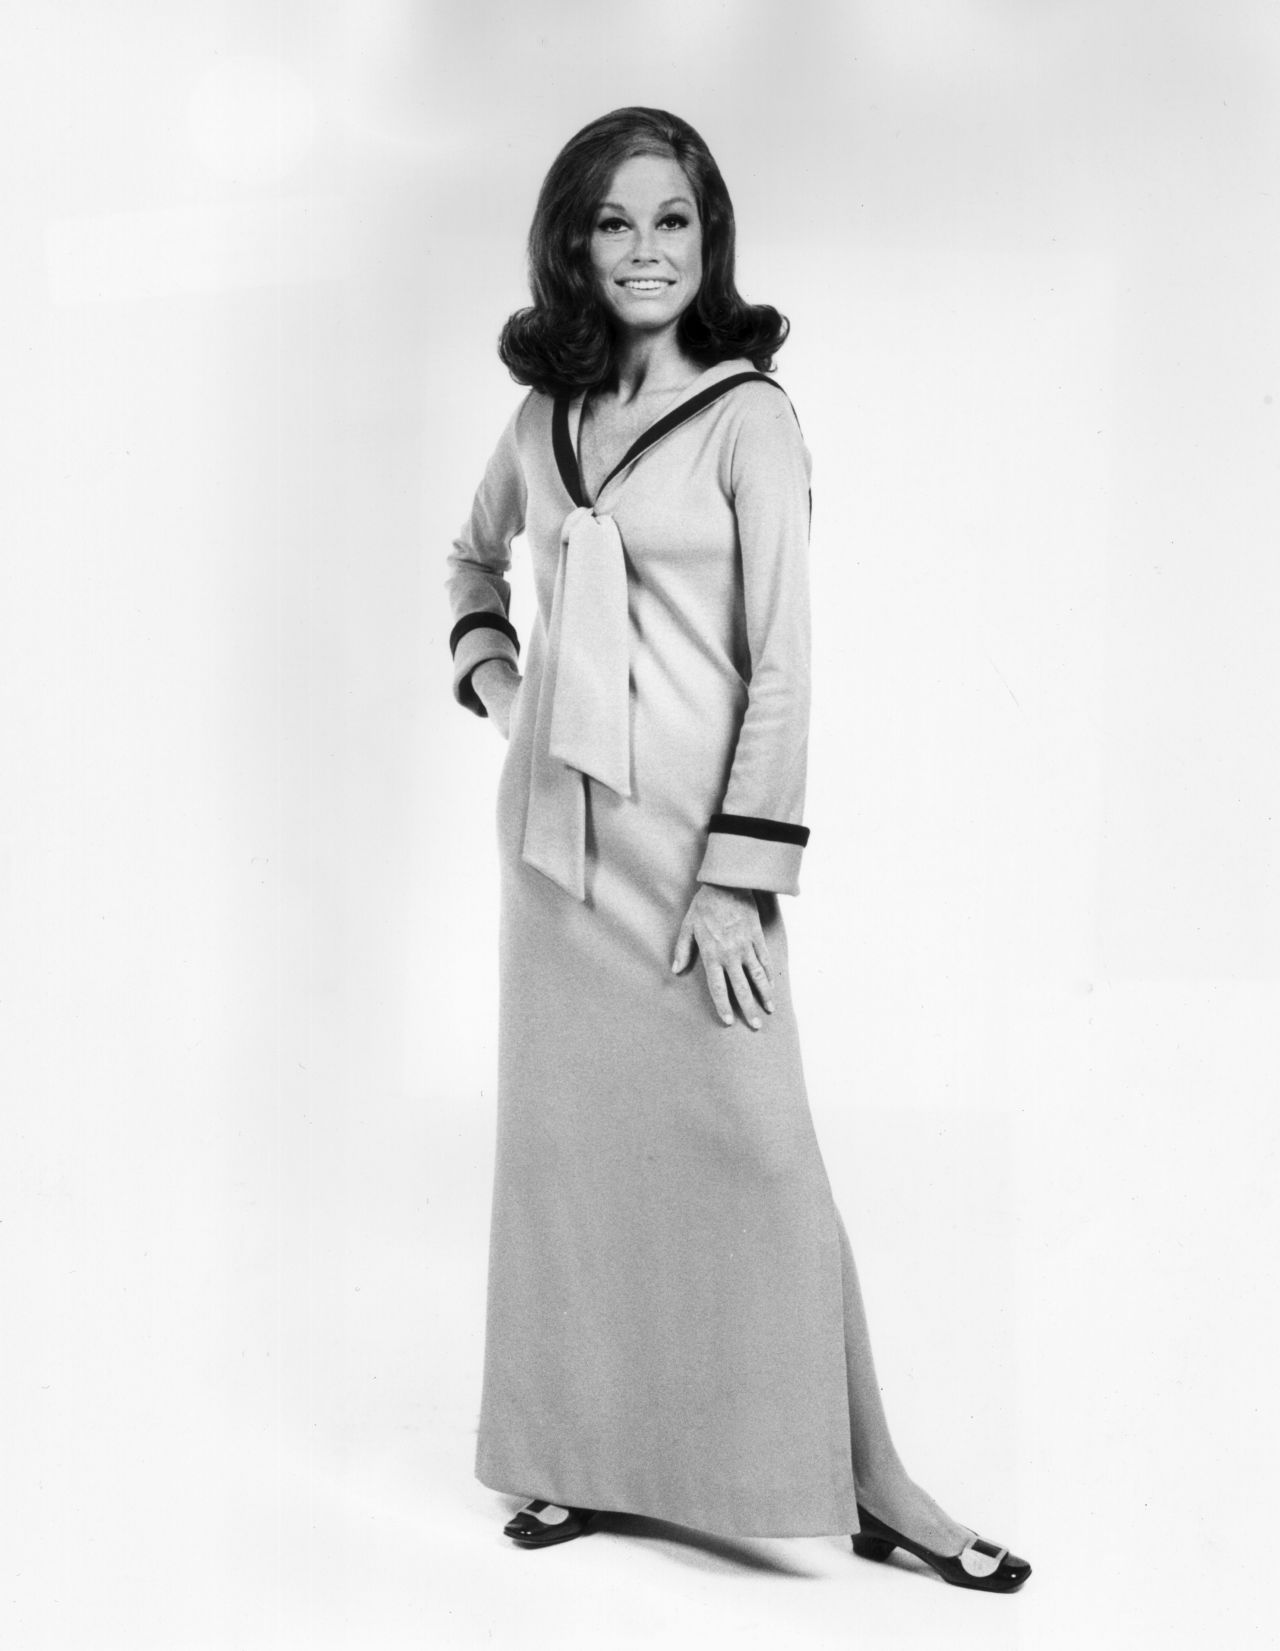 American actress Mary Tyler Moore opts for a more demure full-length dress with nautical collar, in this 1974 image.  